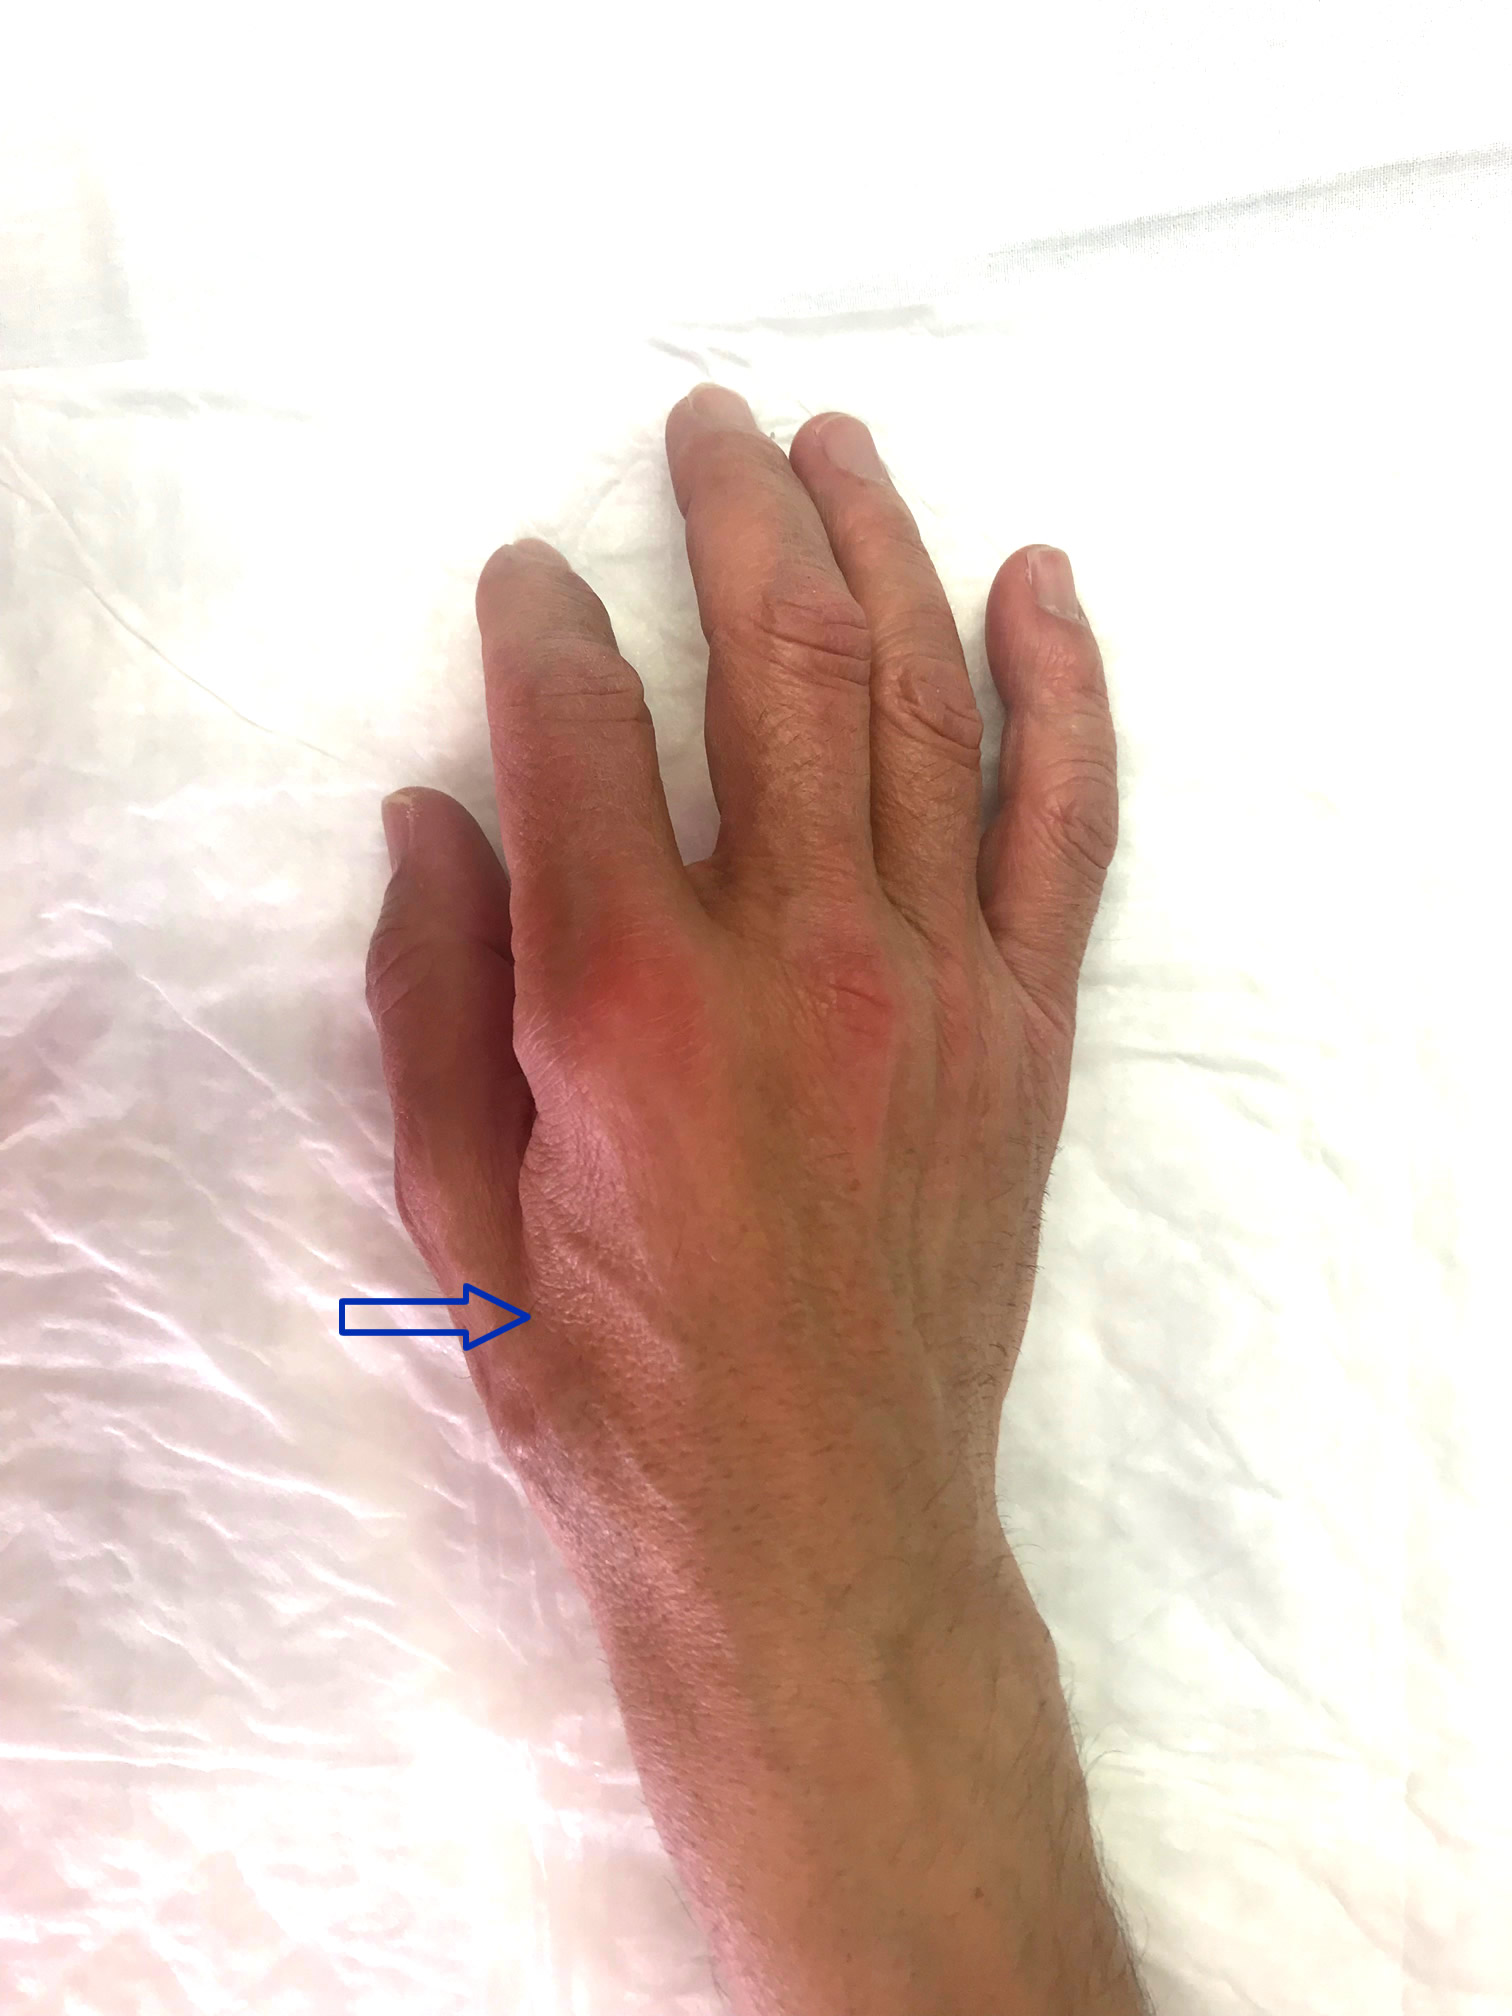 the little finger of the hand is numb: the compression of the ulnar nerve in the elbow